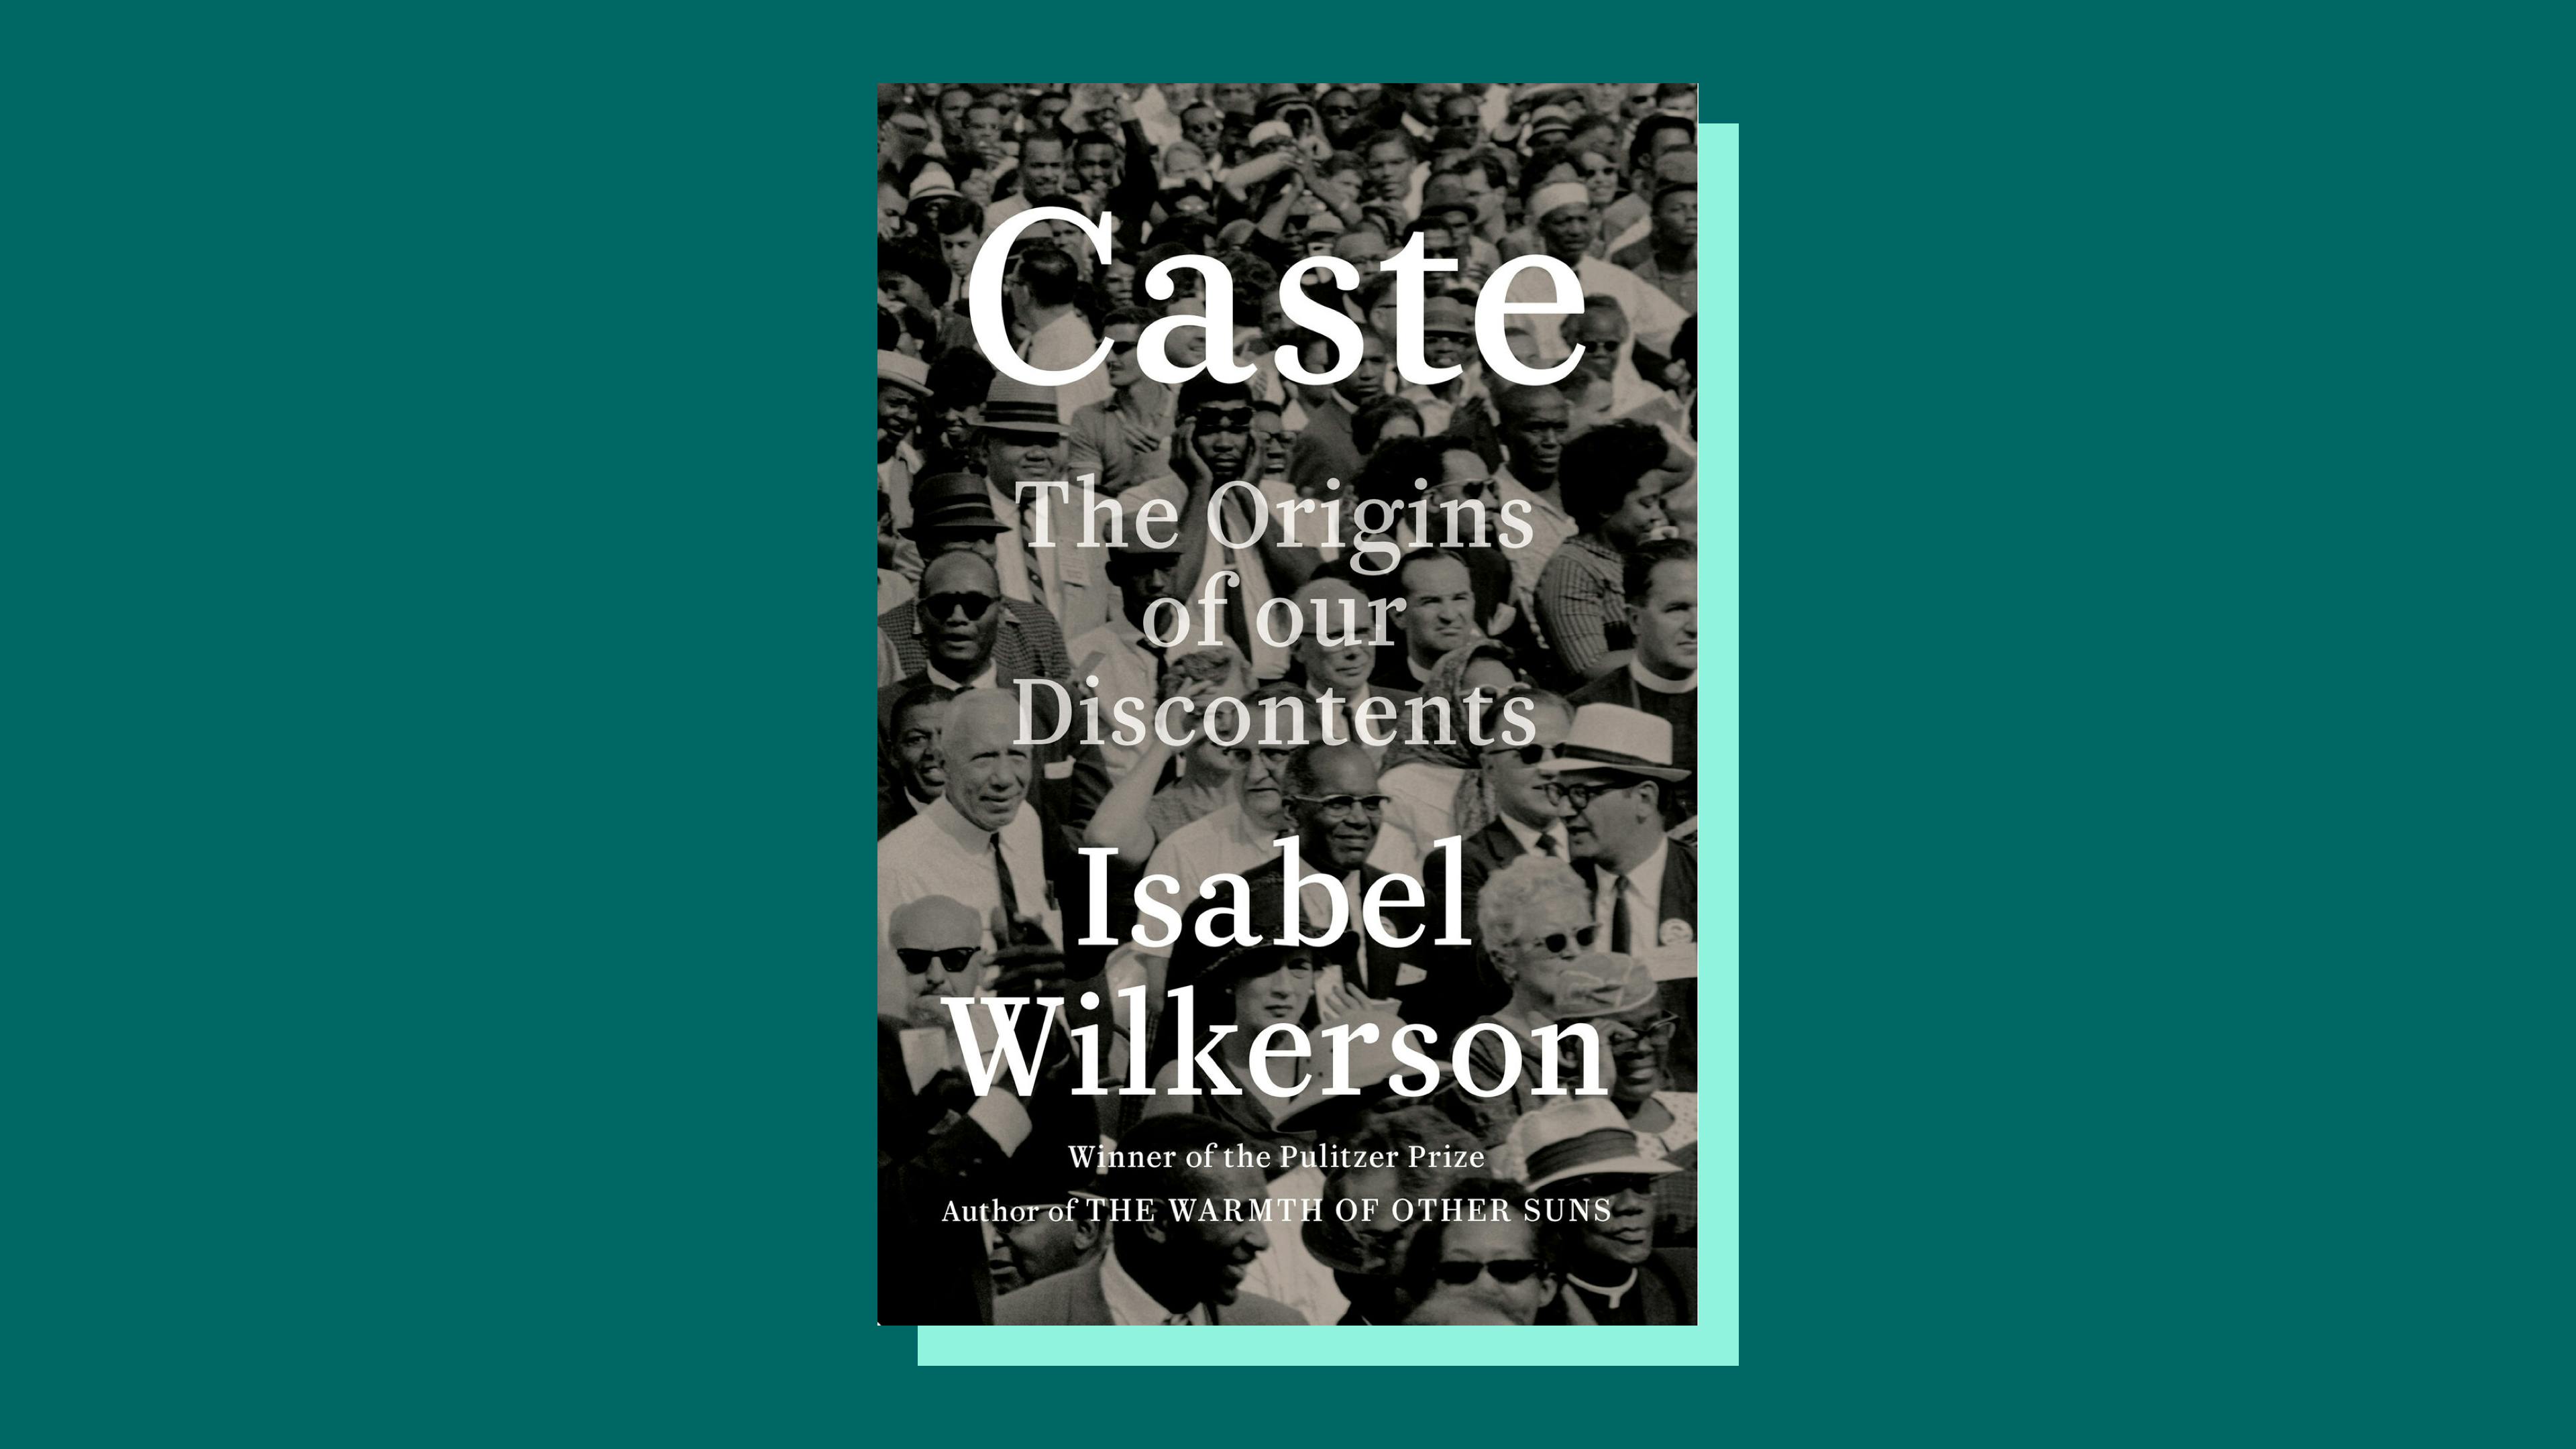 “Caste: The Origins of Our Discontents” by Isabel Wilkerson 